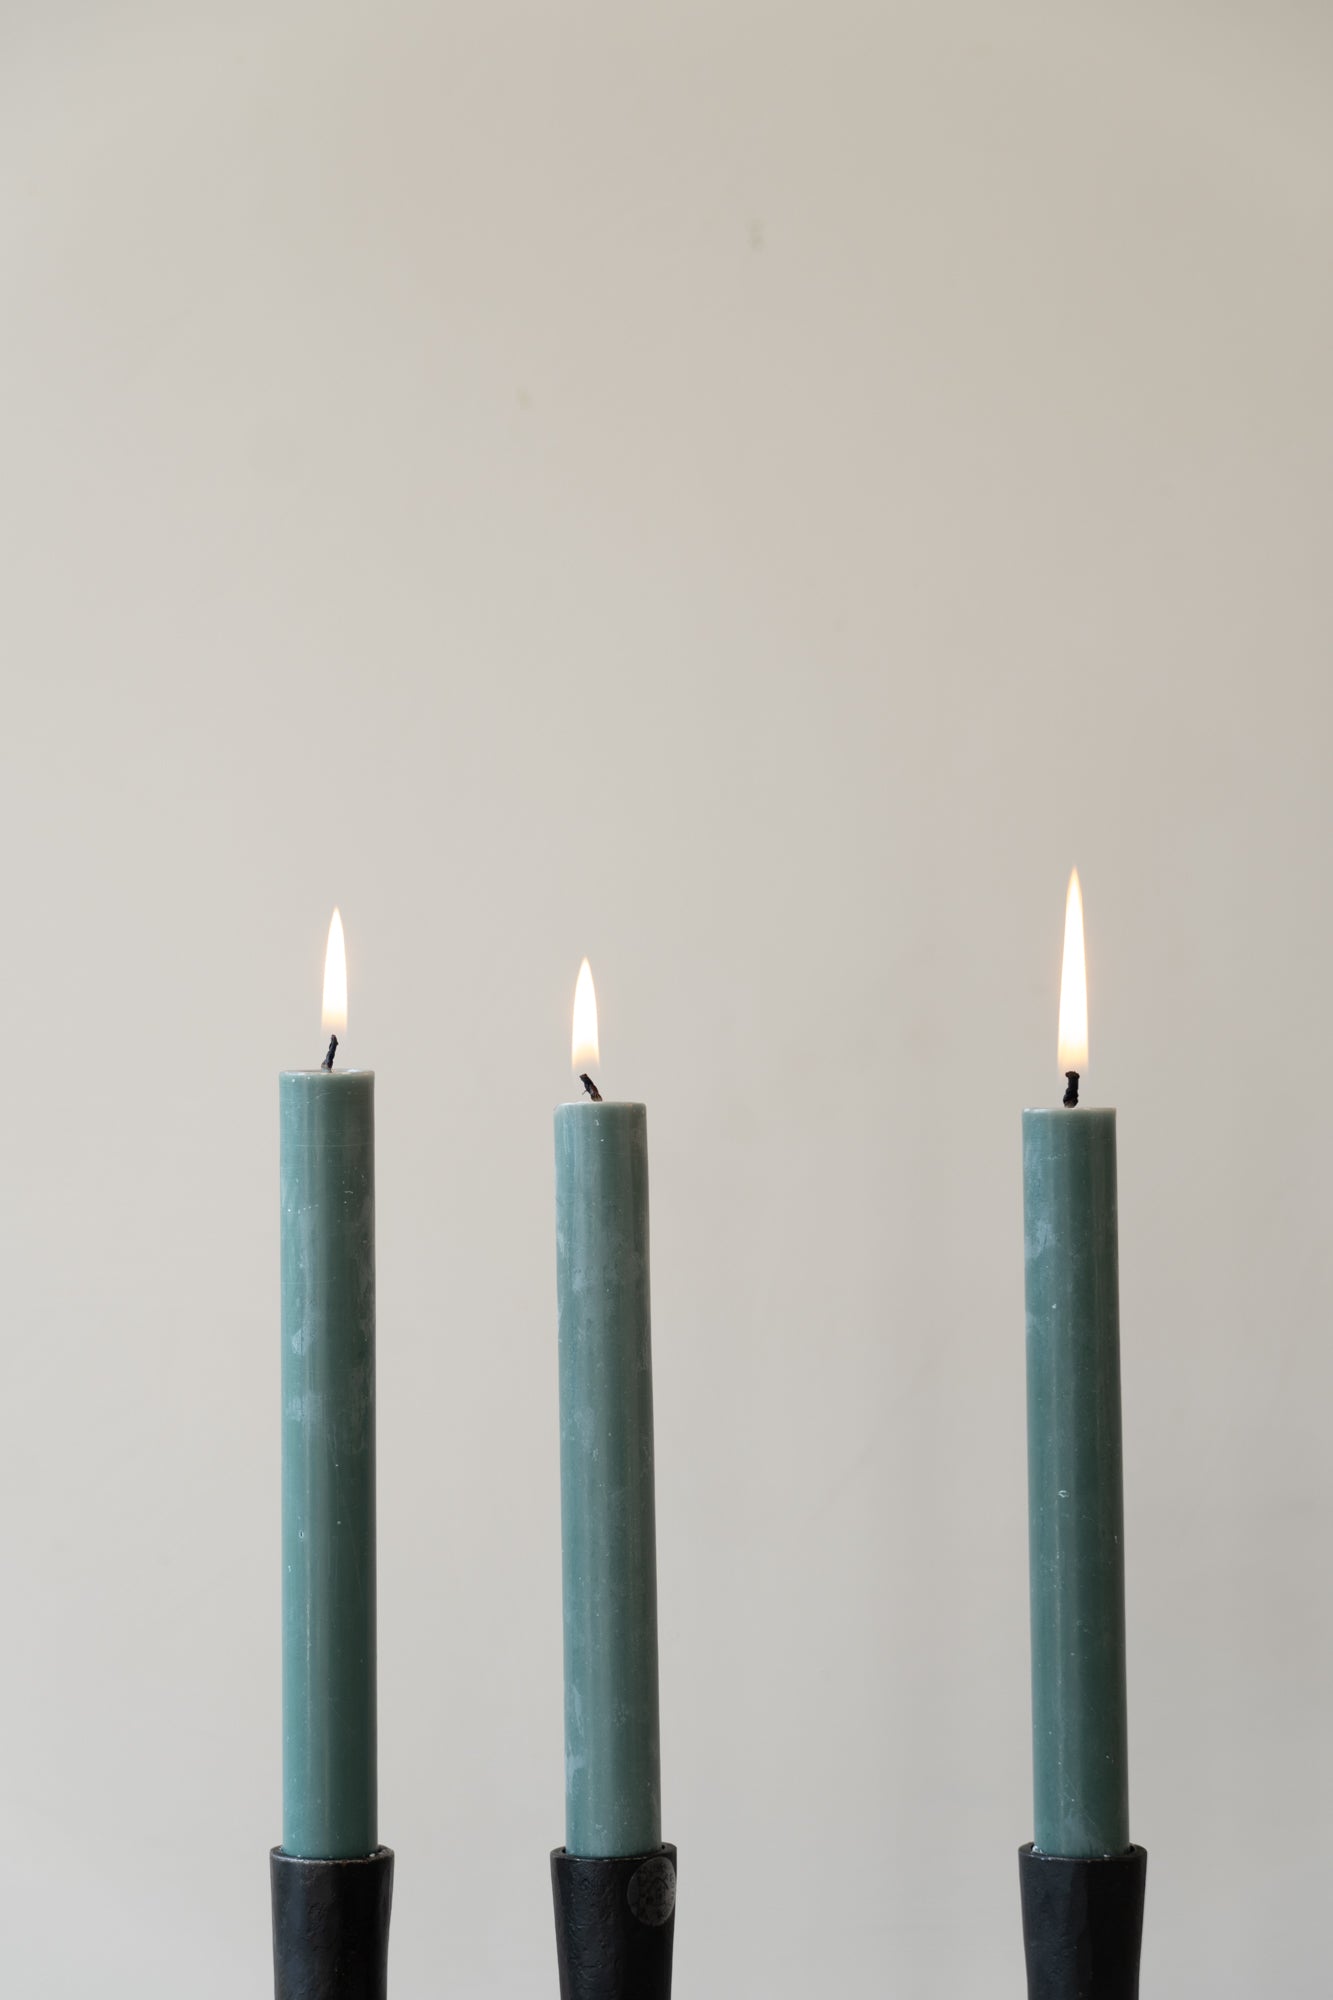 Three forest green lit dinner candles in black candle holders.